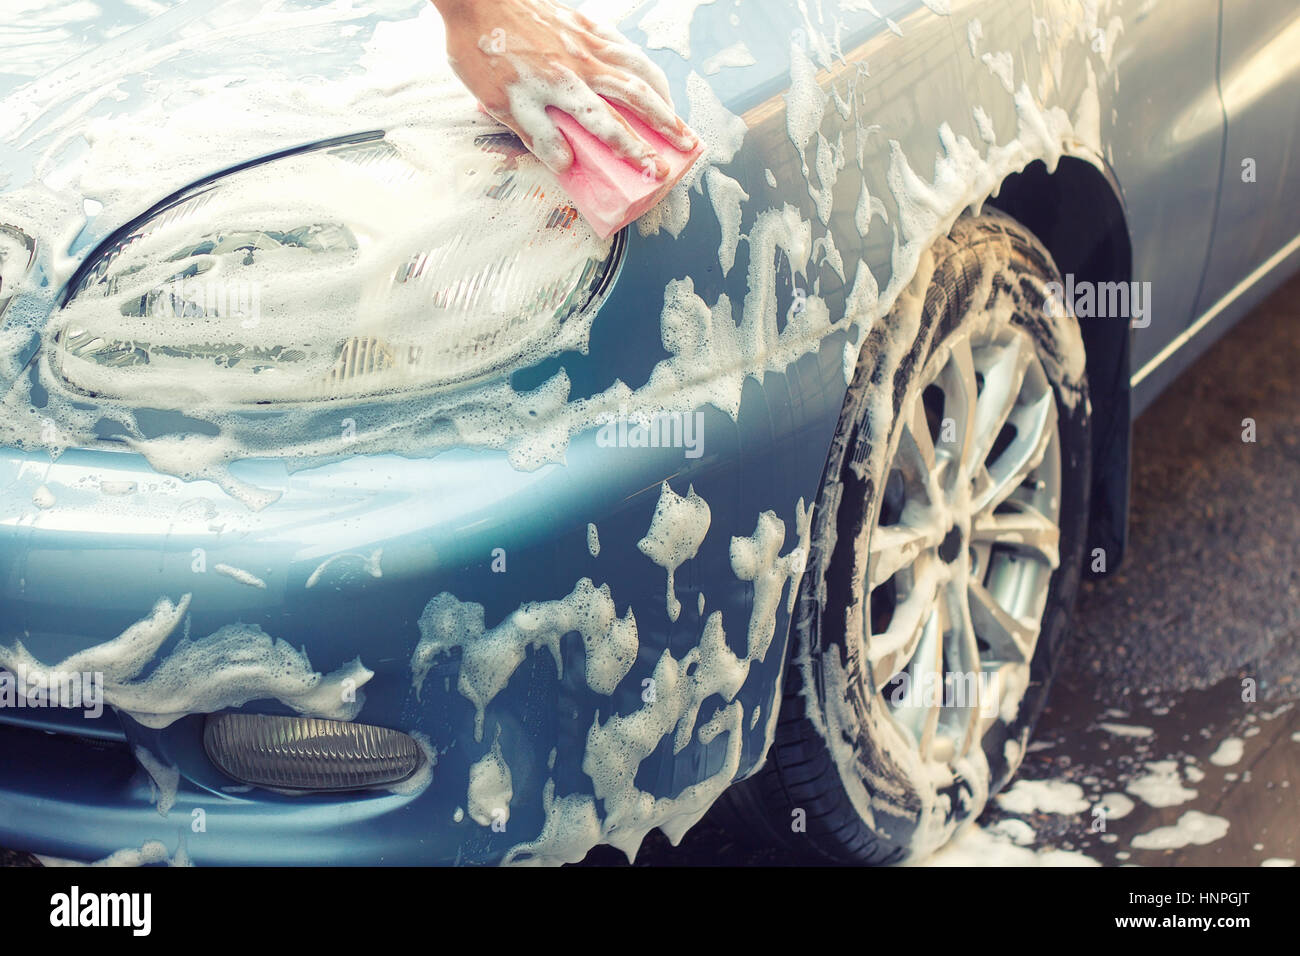 Washing the car by hand with soapy sponge. Cleaning the car. Car care concept. Hand of man washing the car using the sponge with foam Stock Photo